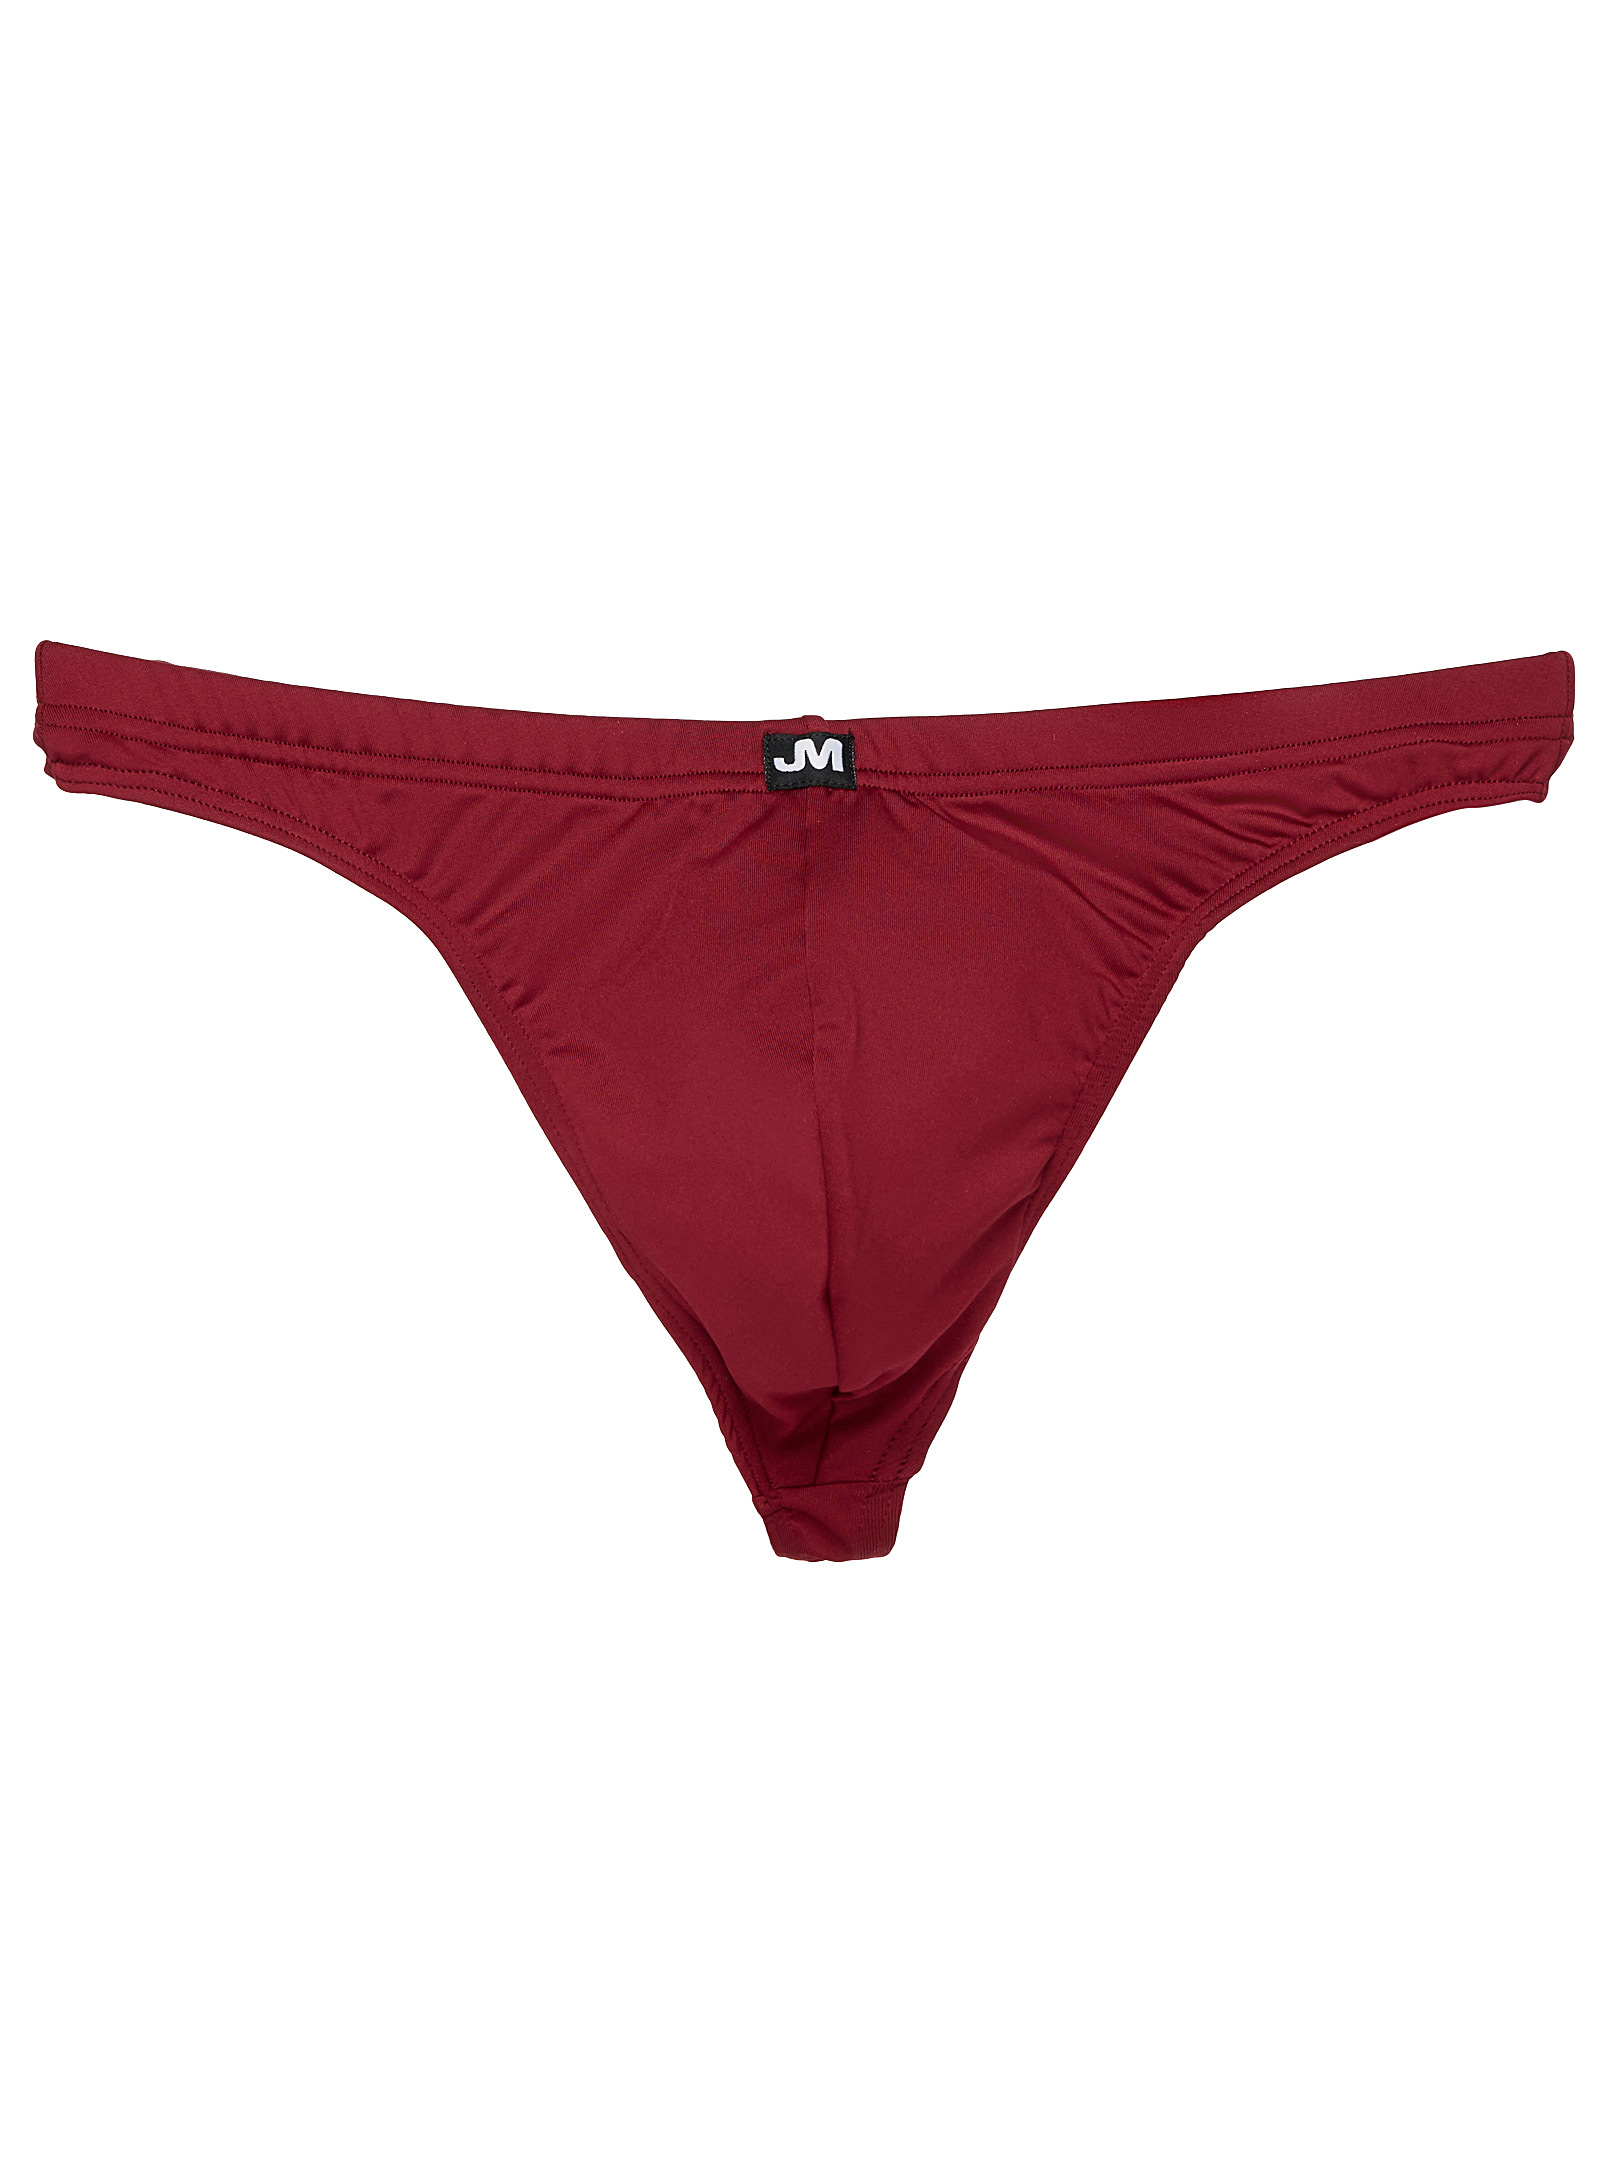 Jm Second Skin Thong In Red